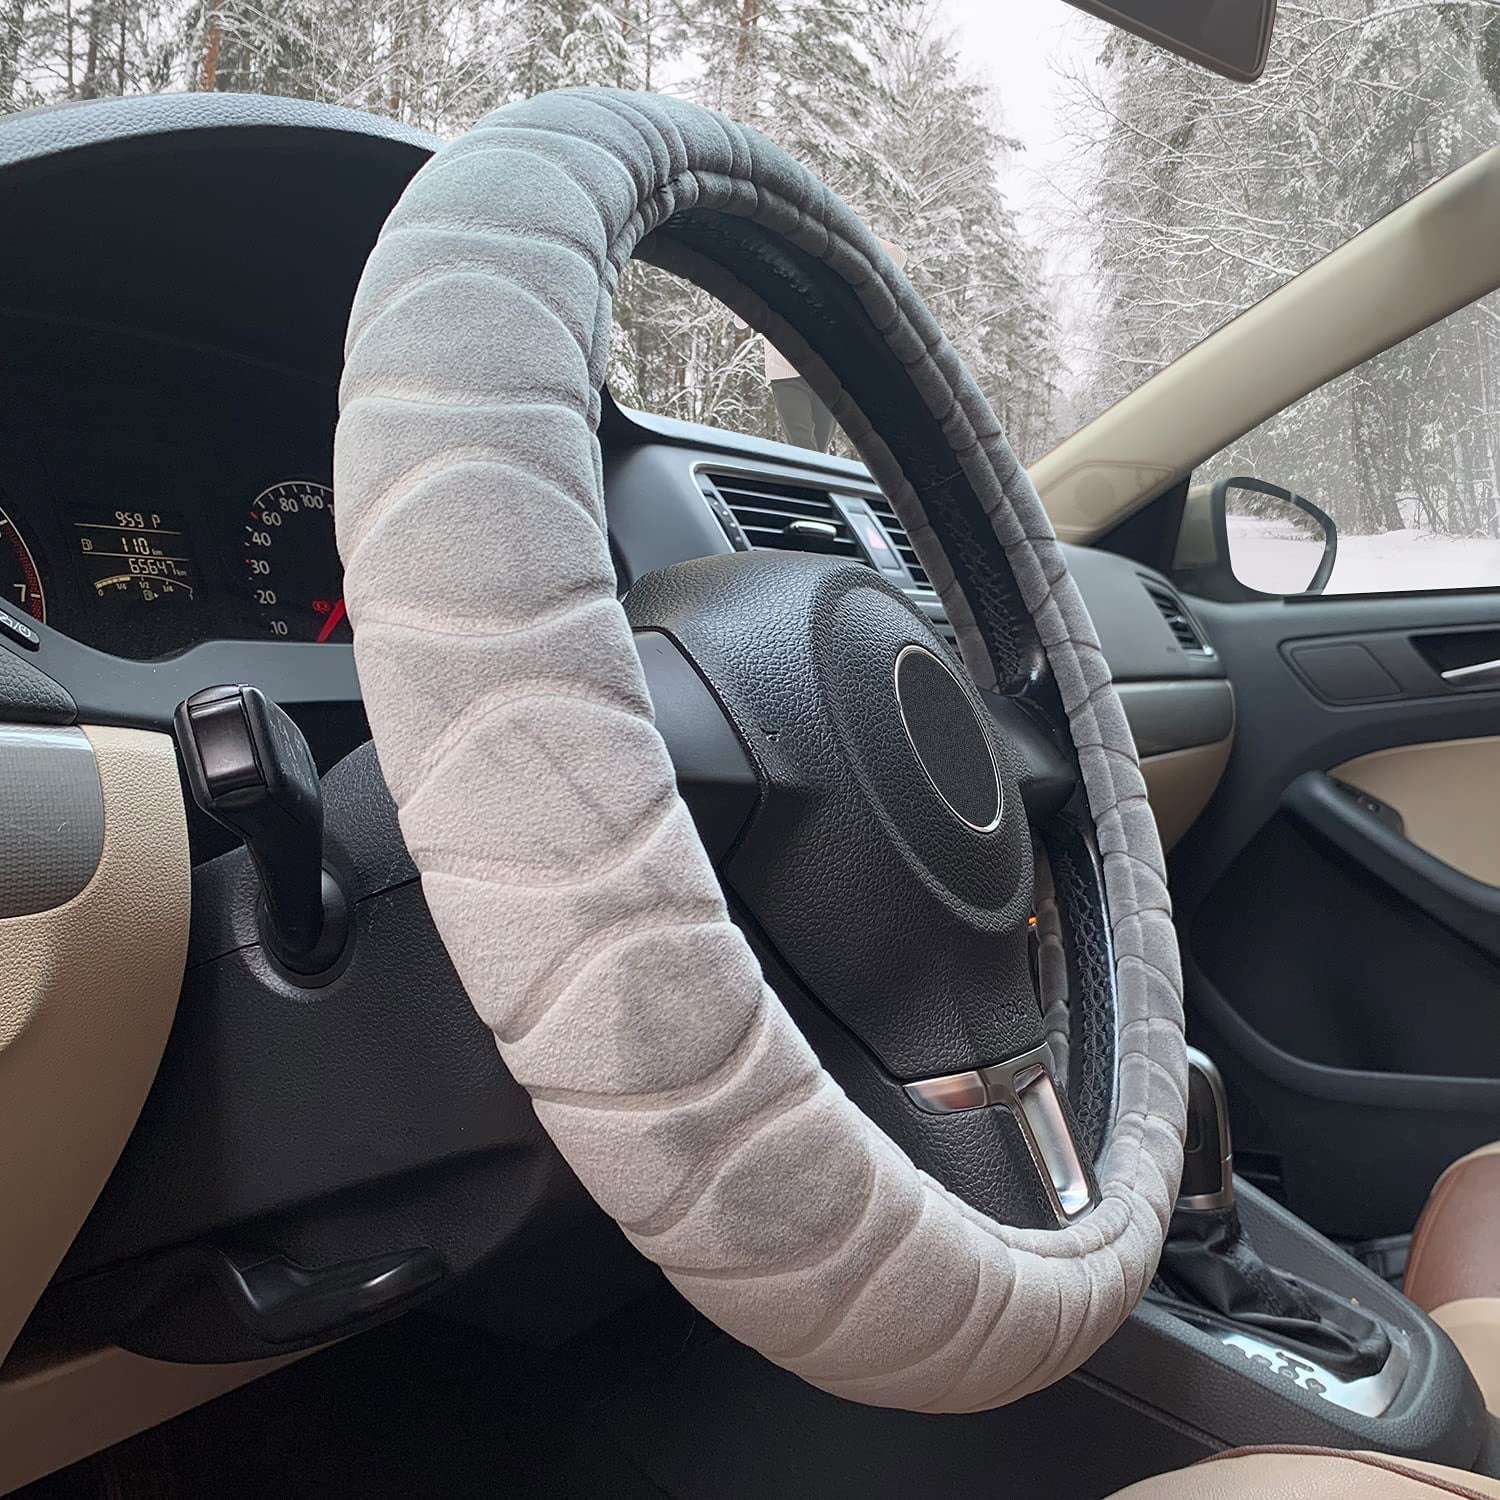 Black HOUSE DAY Car Steering Wheel Cover Fluffy Plush Wool Cover for Women/Girls/Ladies Universal 15 inch 